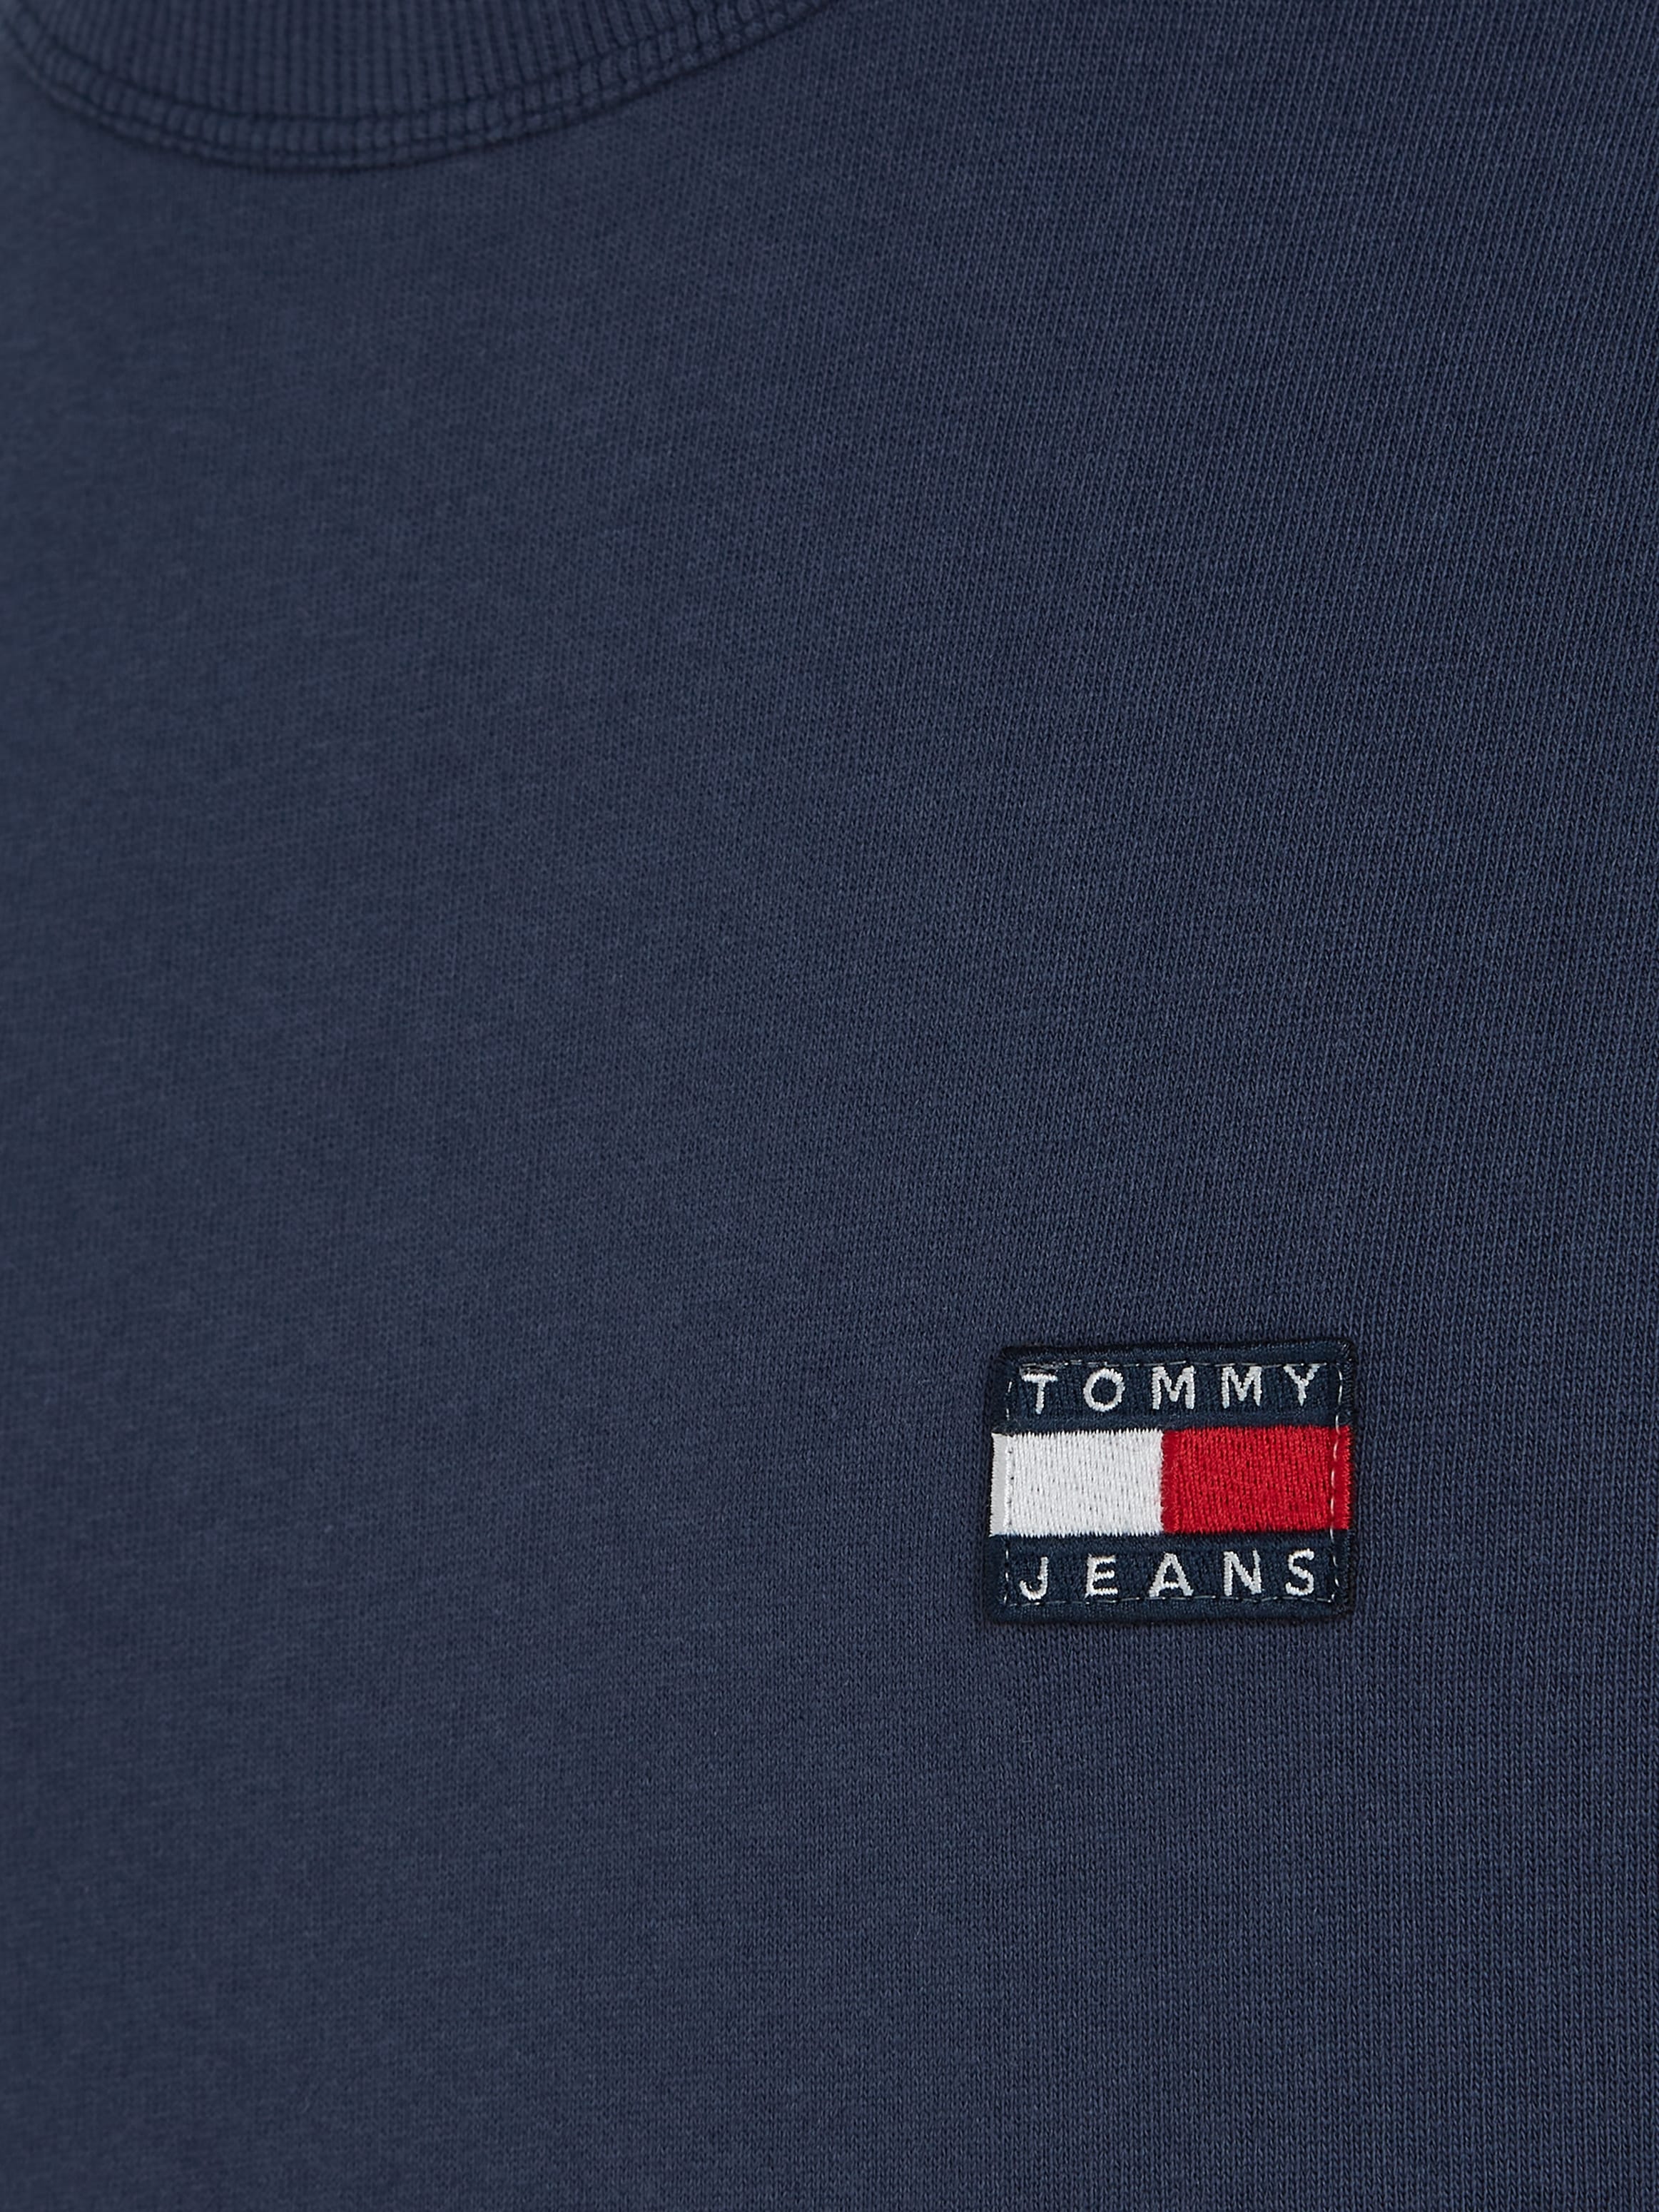 Tommy Jeans T-Shirt »TJM TEE« TOMMY shoppen CLSC XS online BADGE bei OTTO